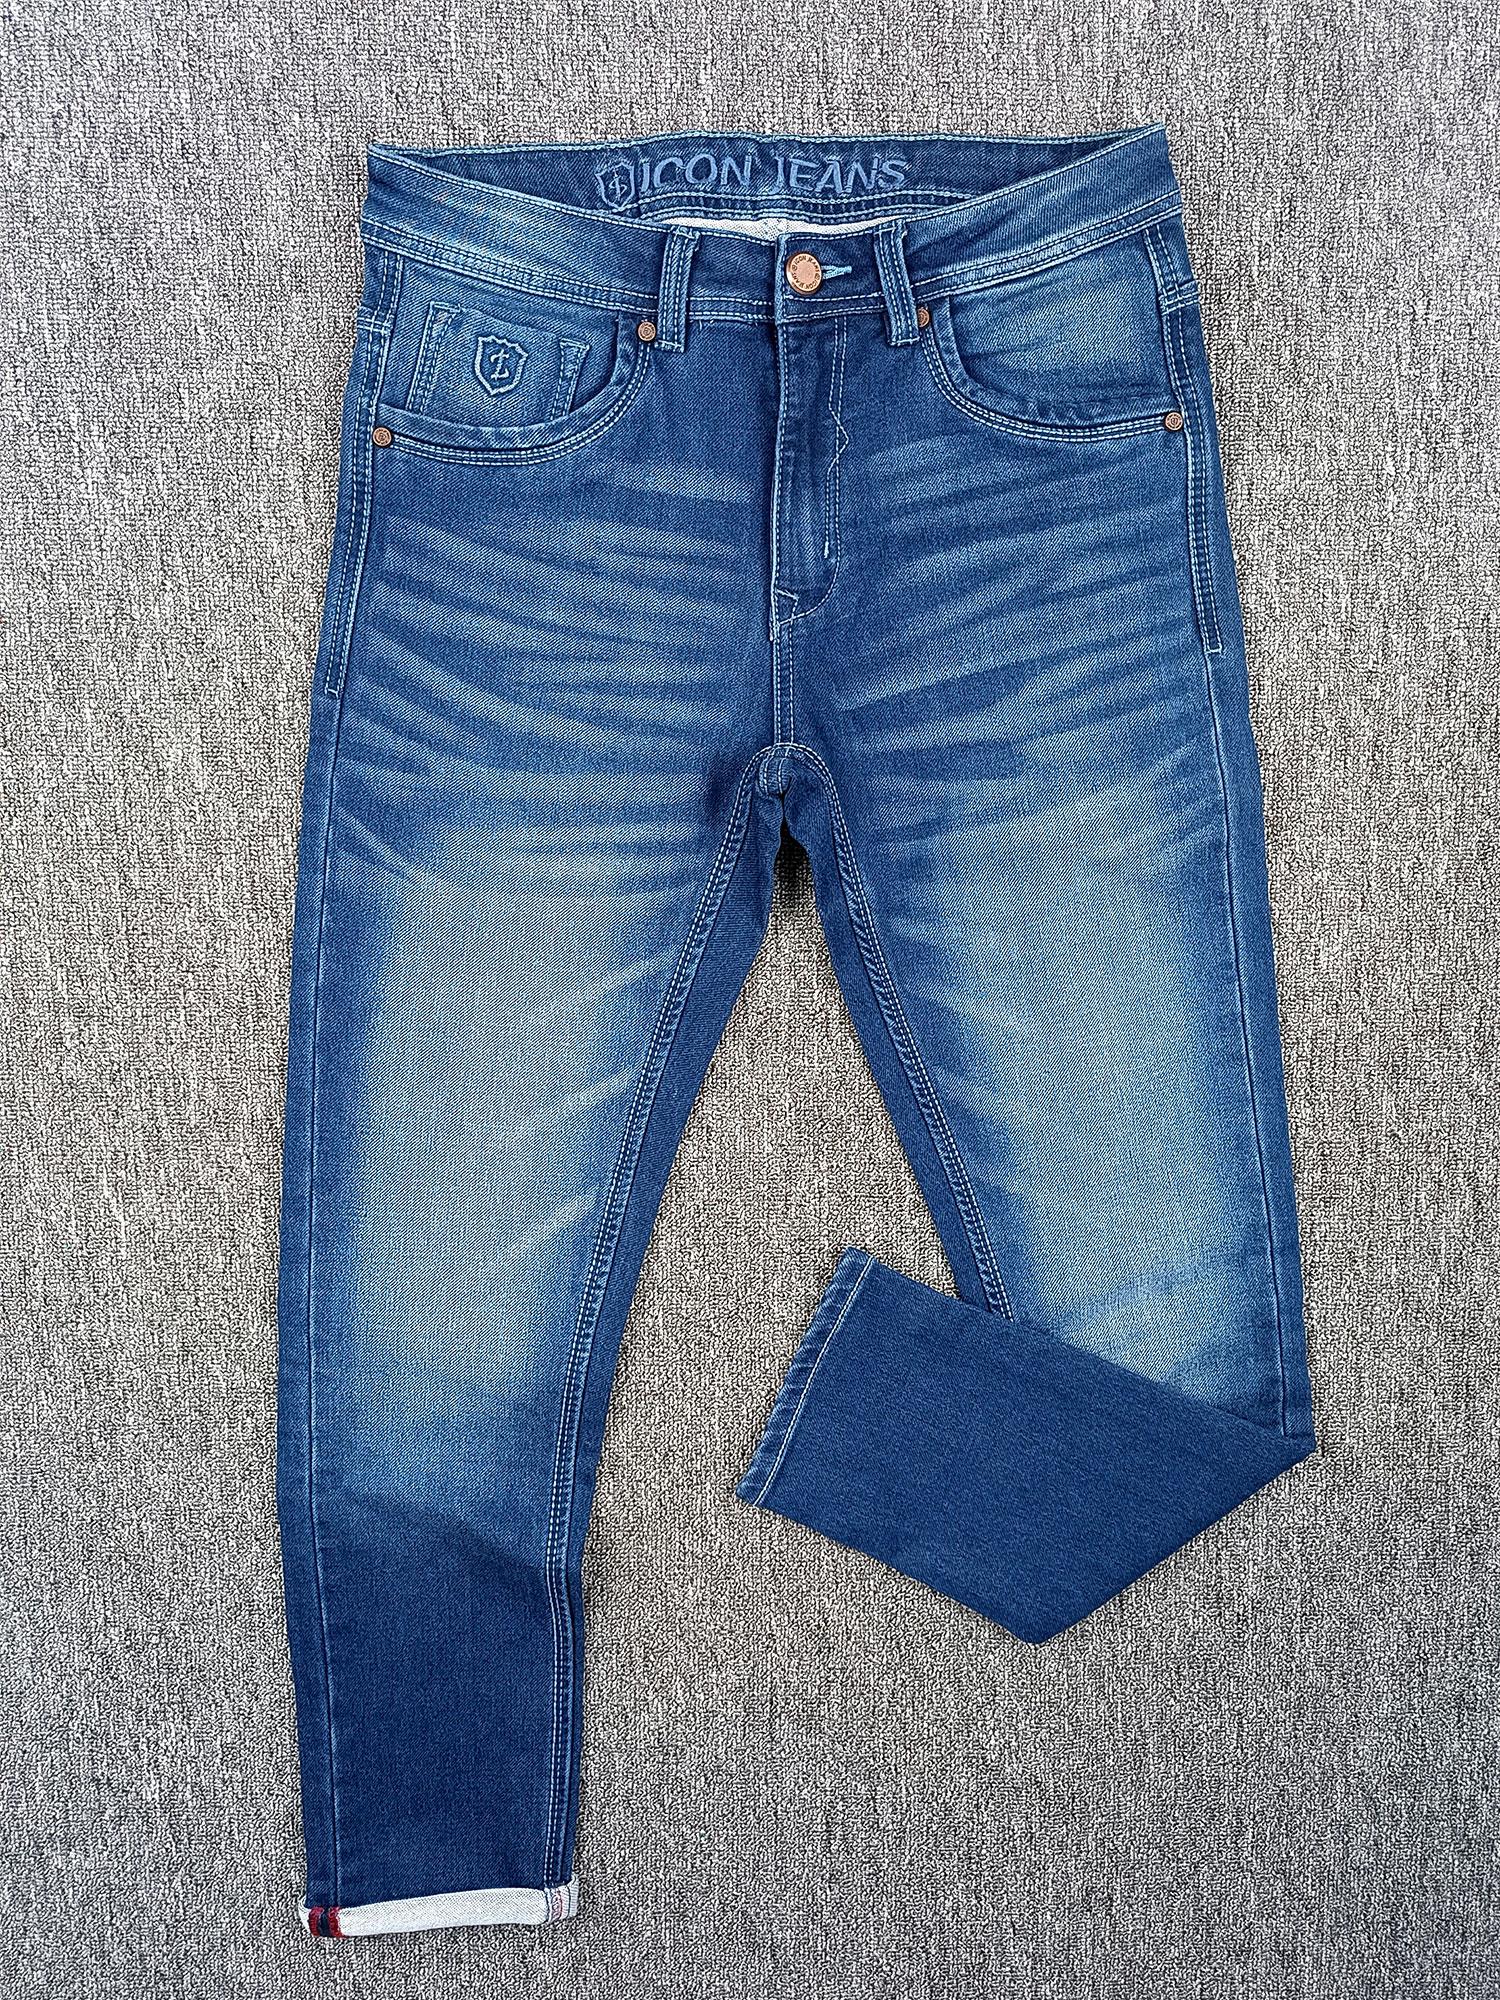 MENS ICON JEANS